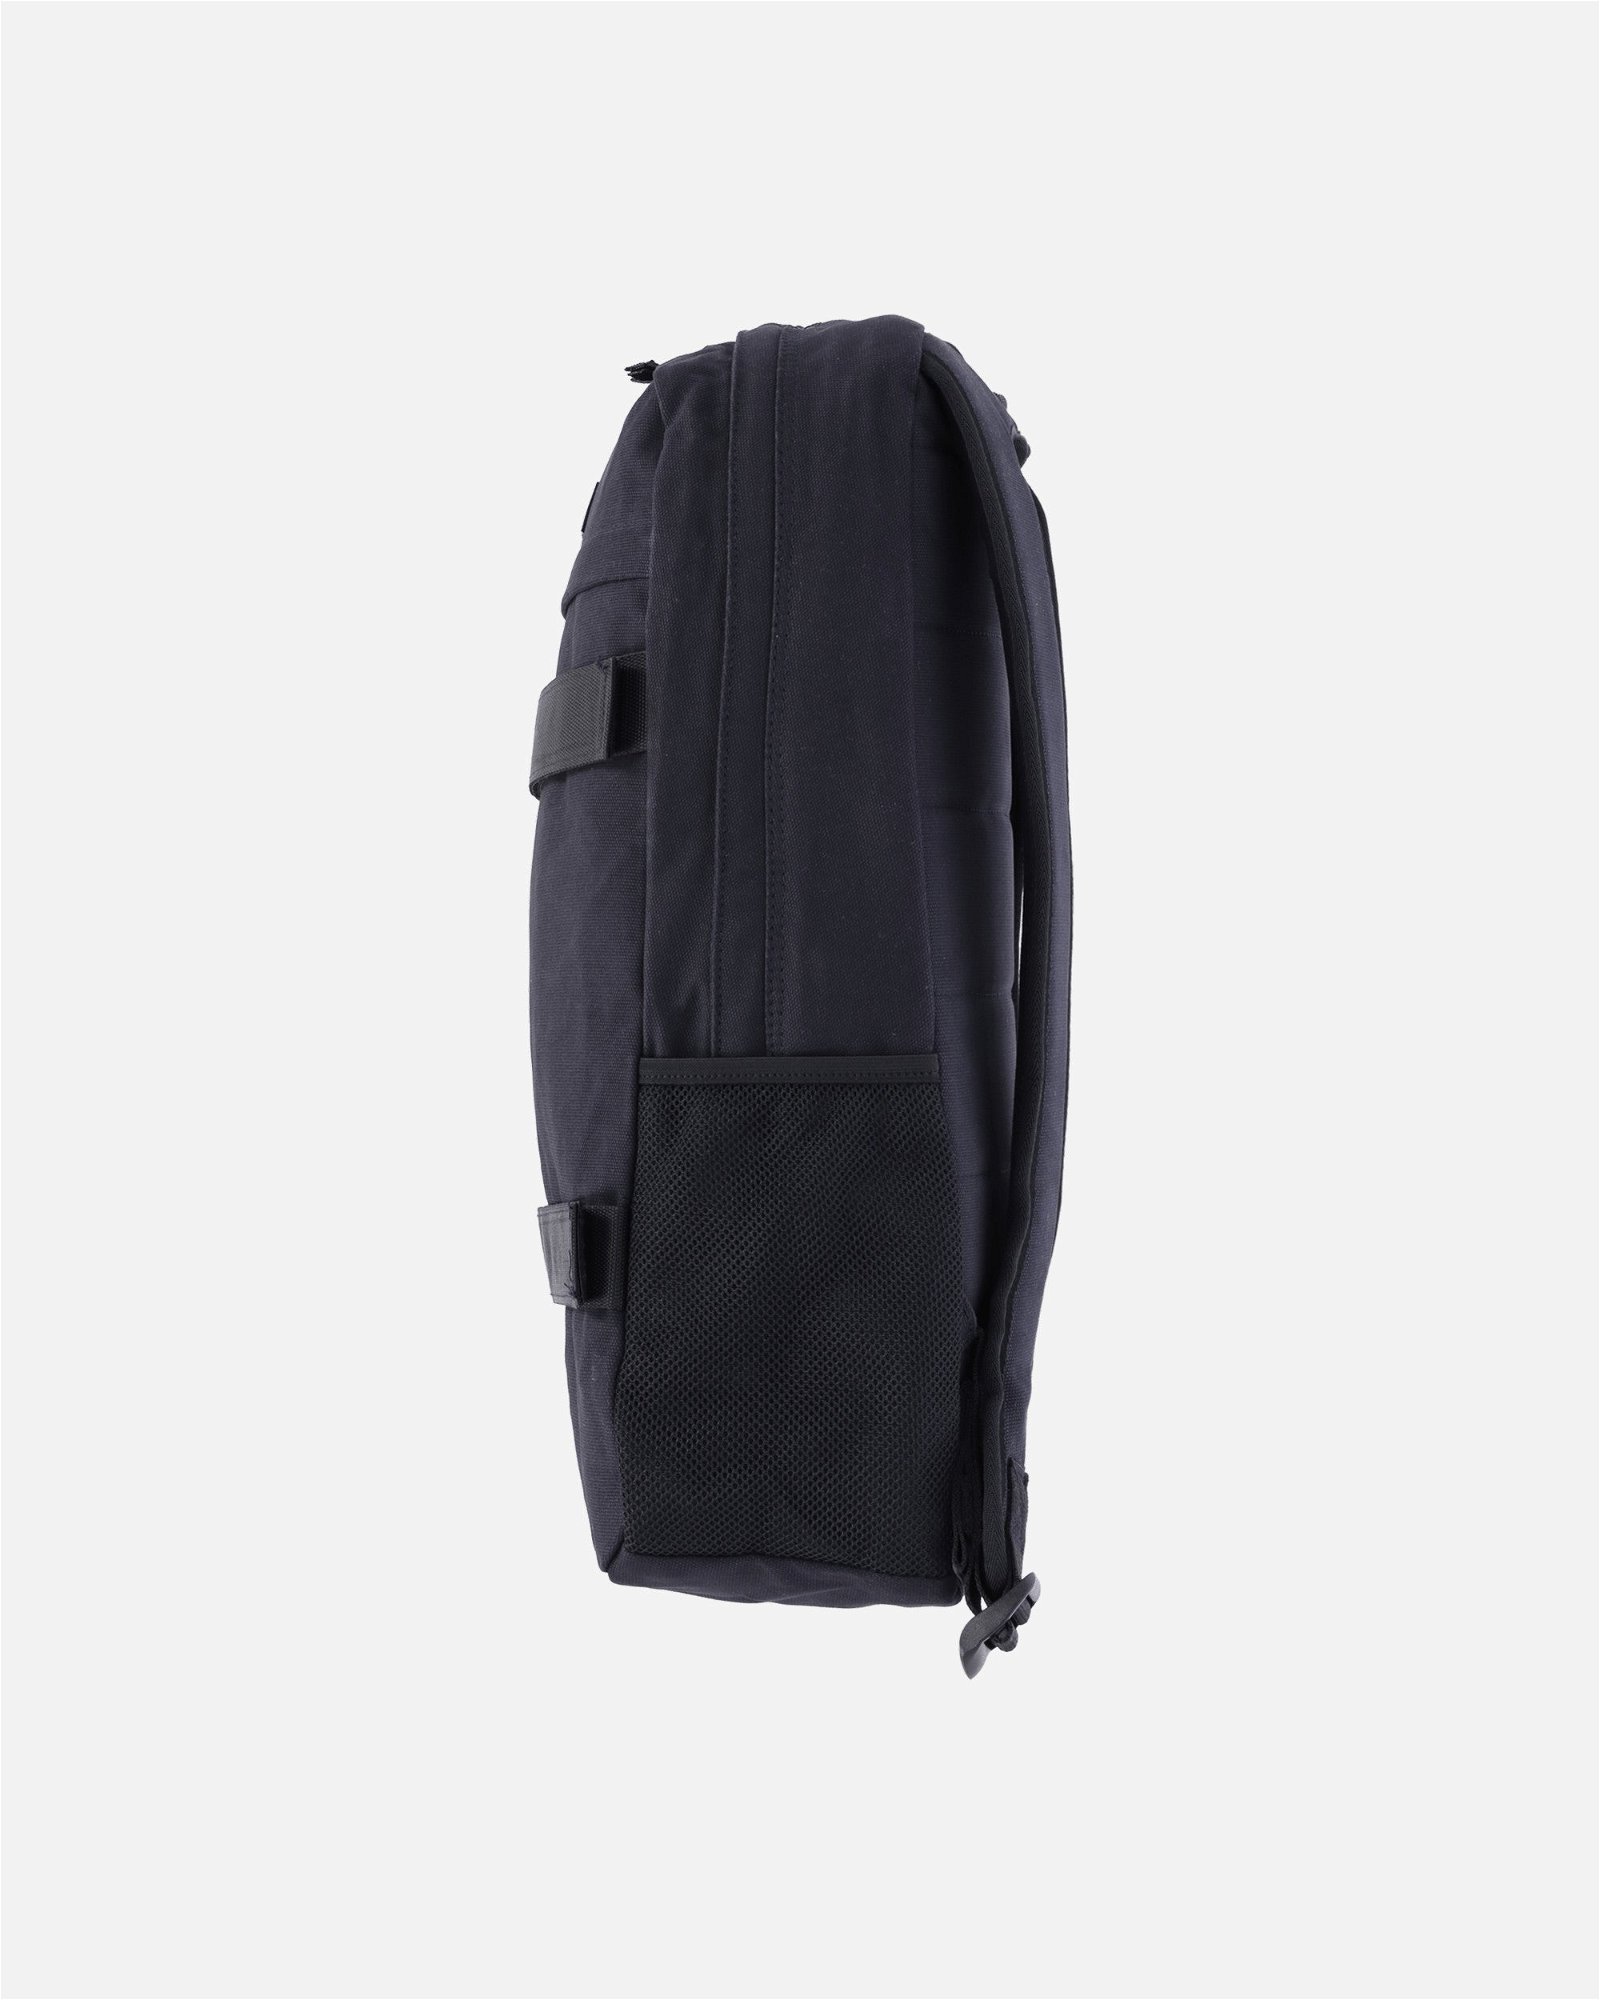 Duck Canvas Plus Backpack